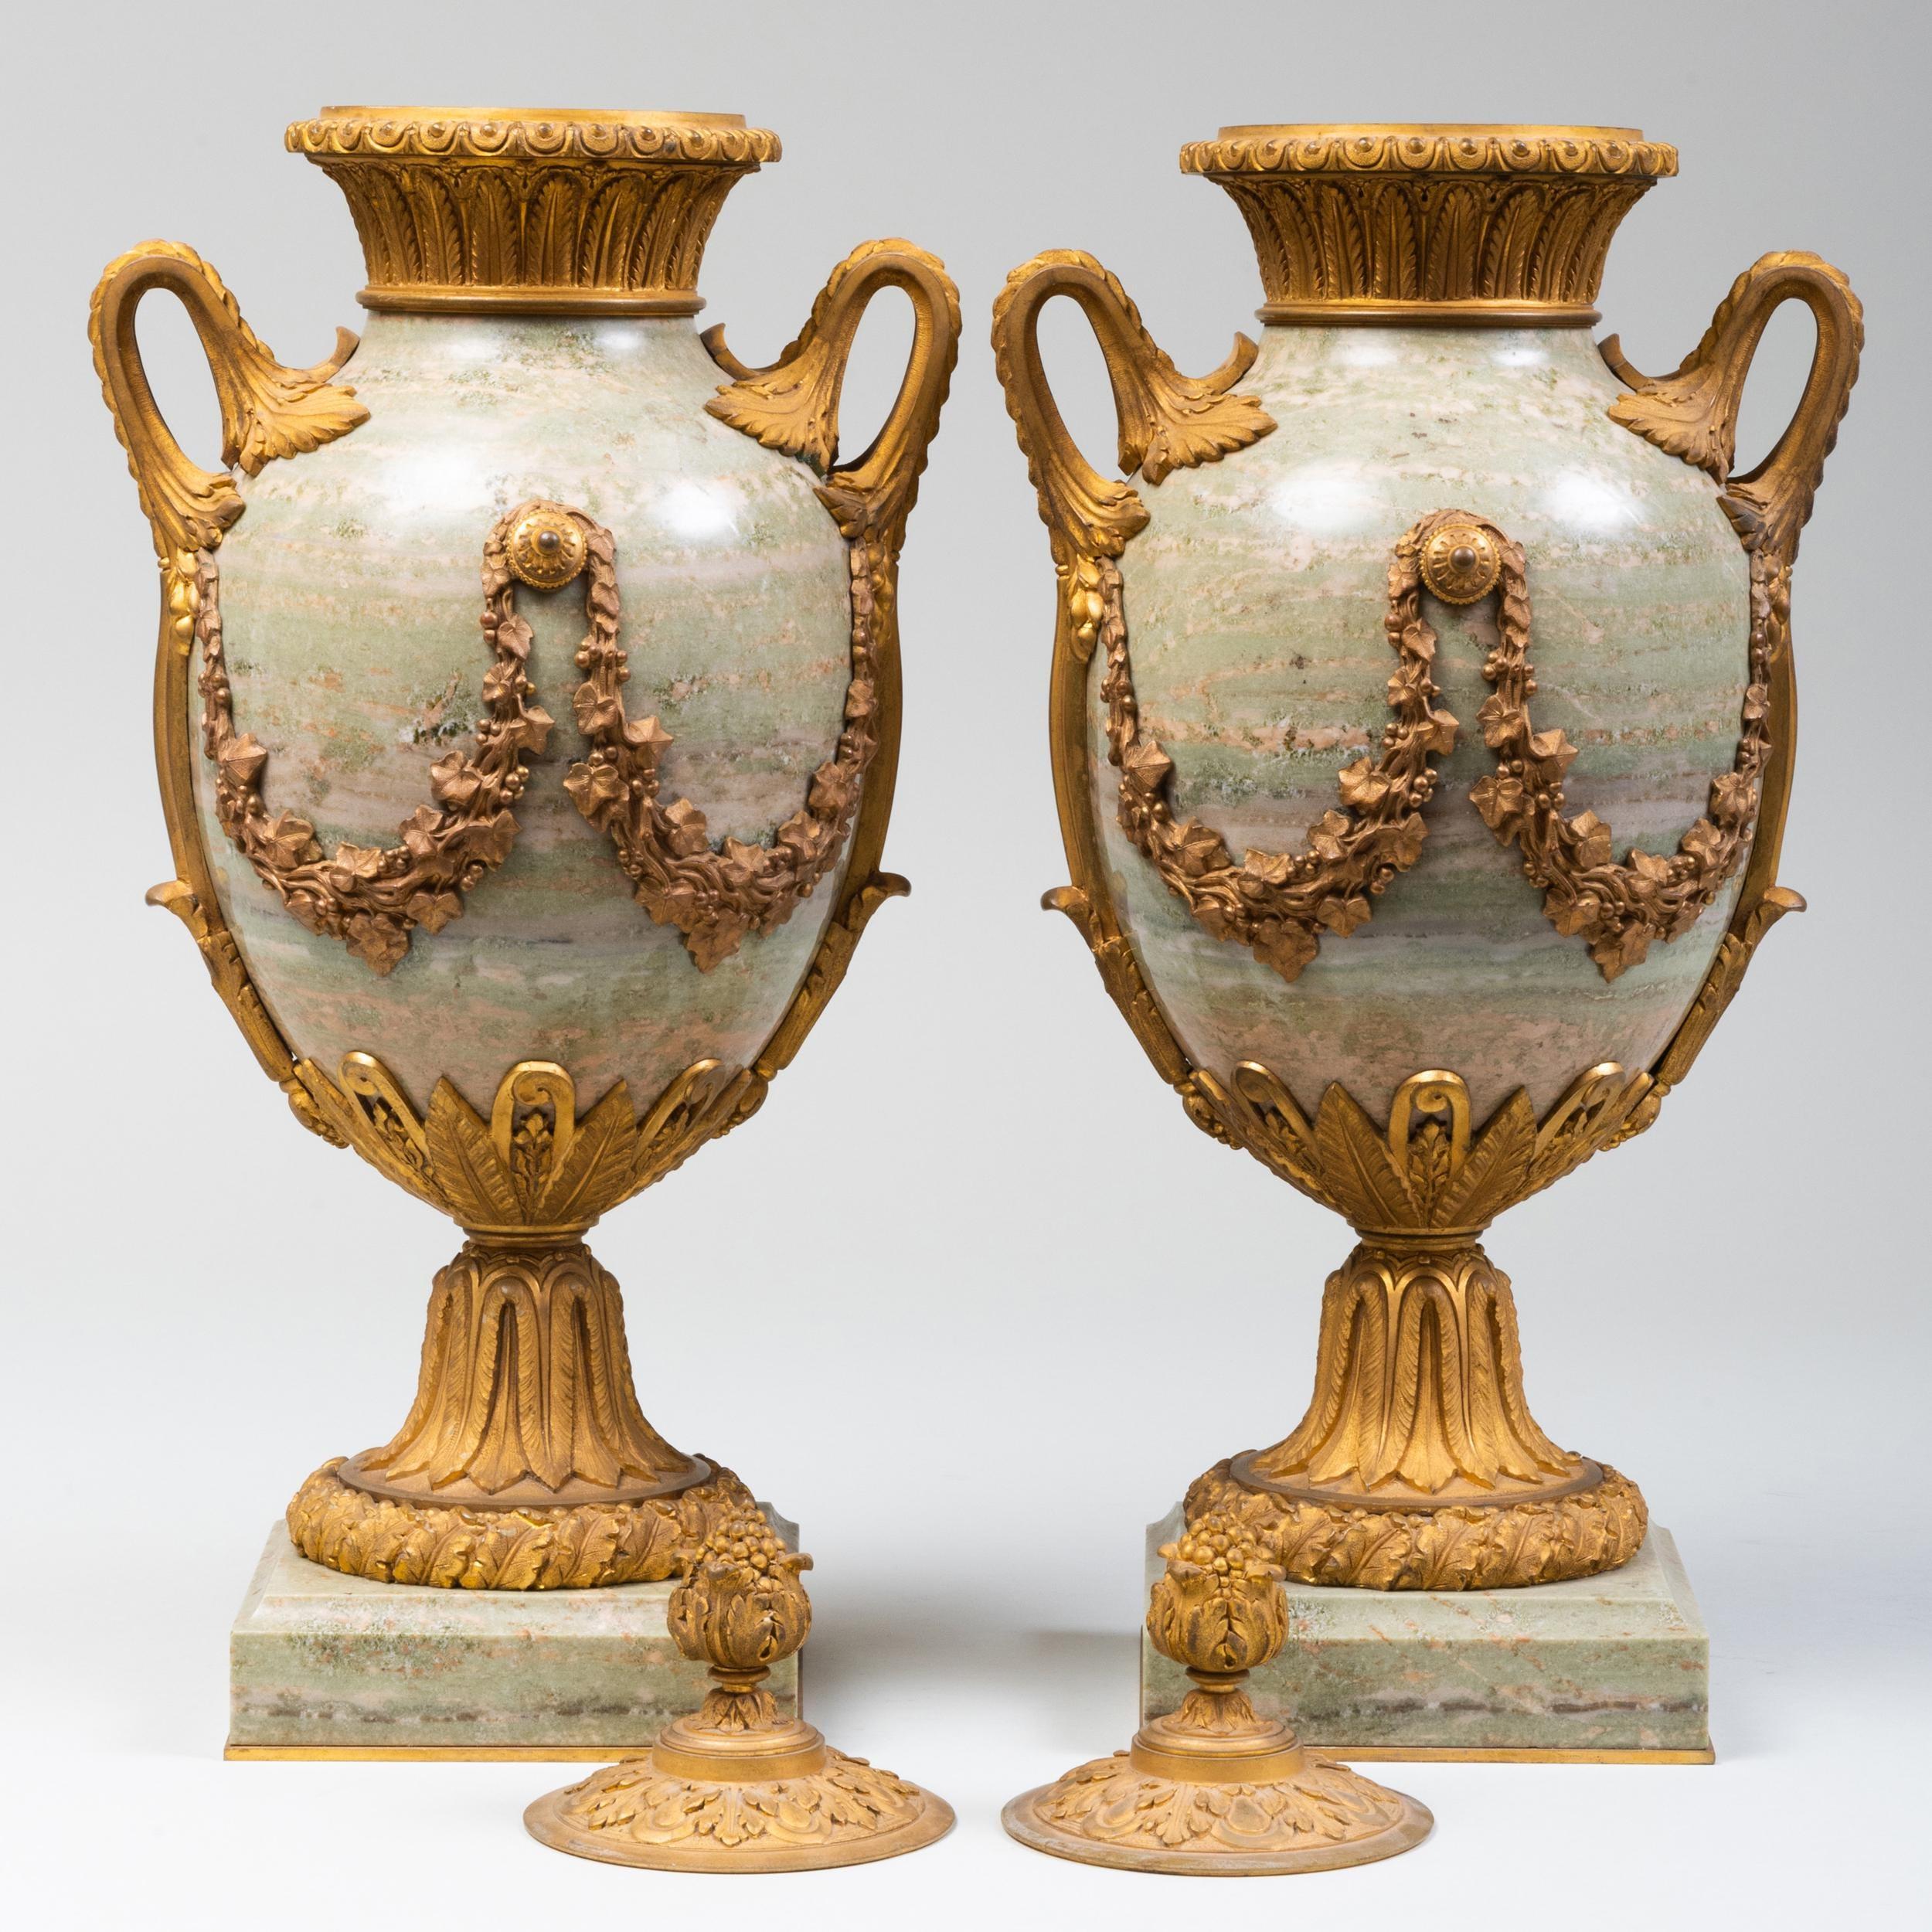 A fine pair of pale green 19th century marble and gilt bronze lidded urns. Fine quality.